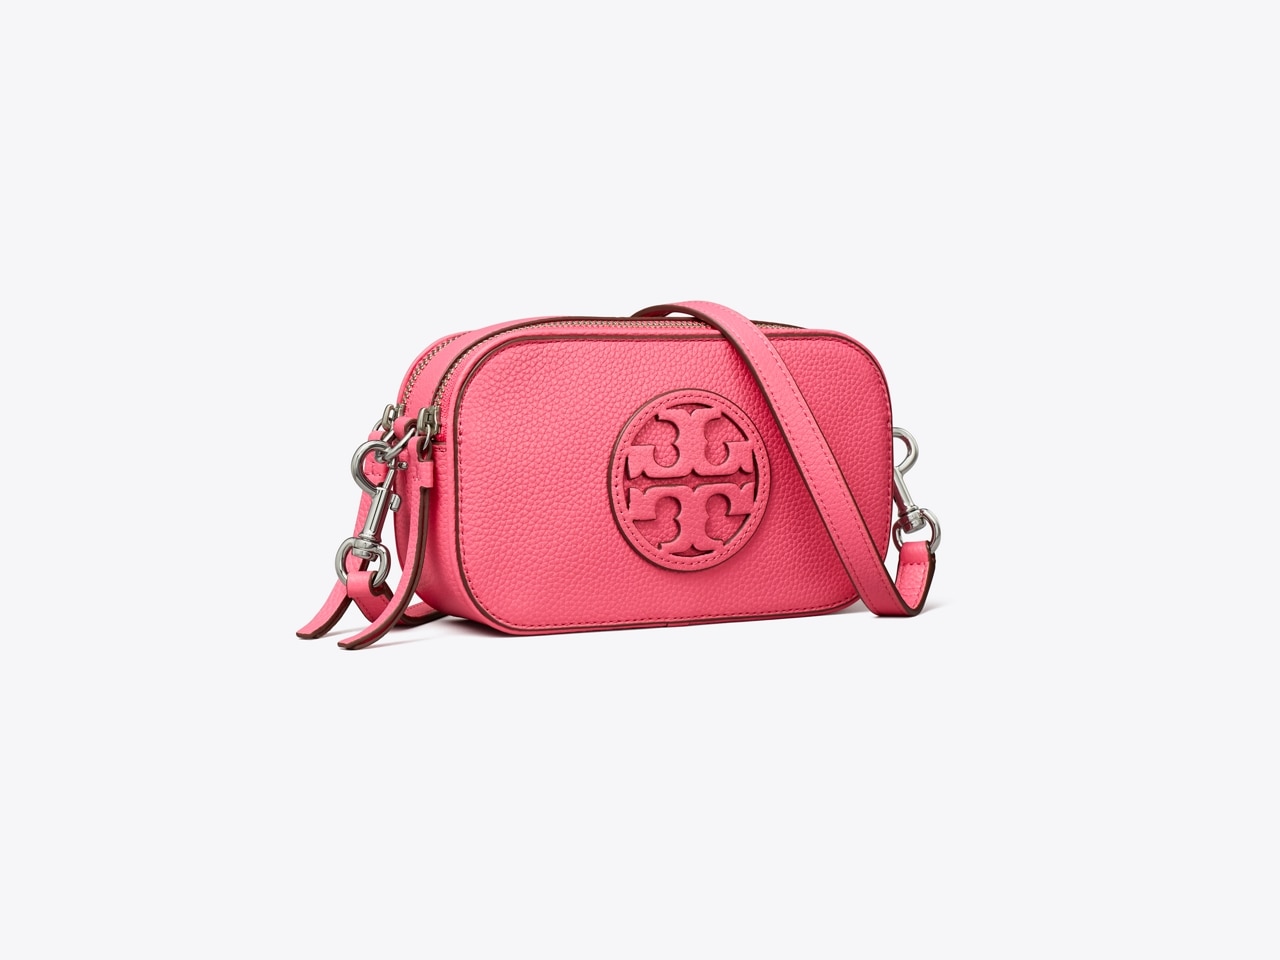 crossbody bag with pink